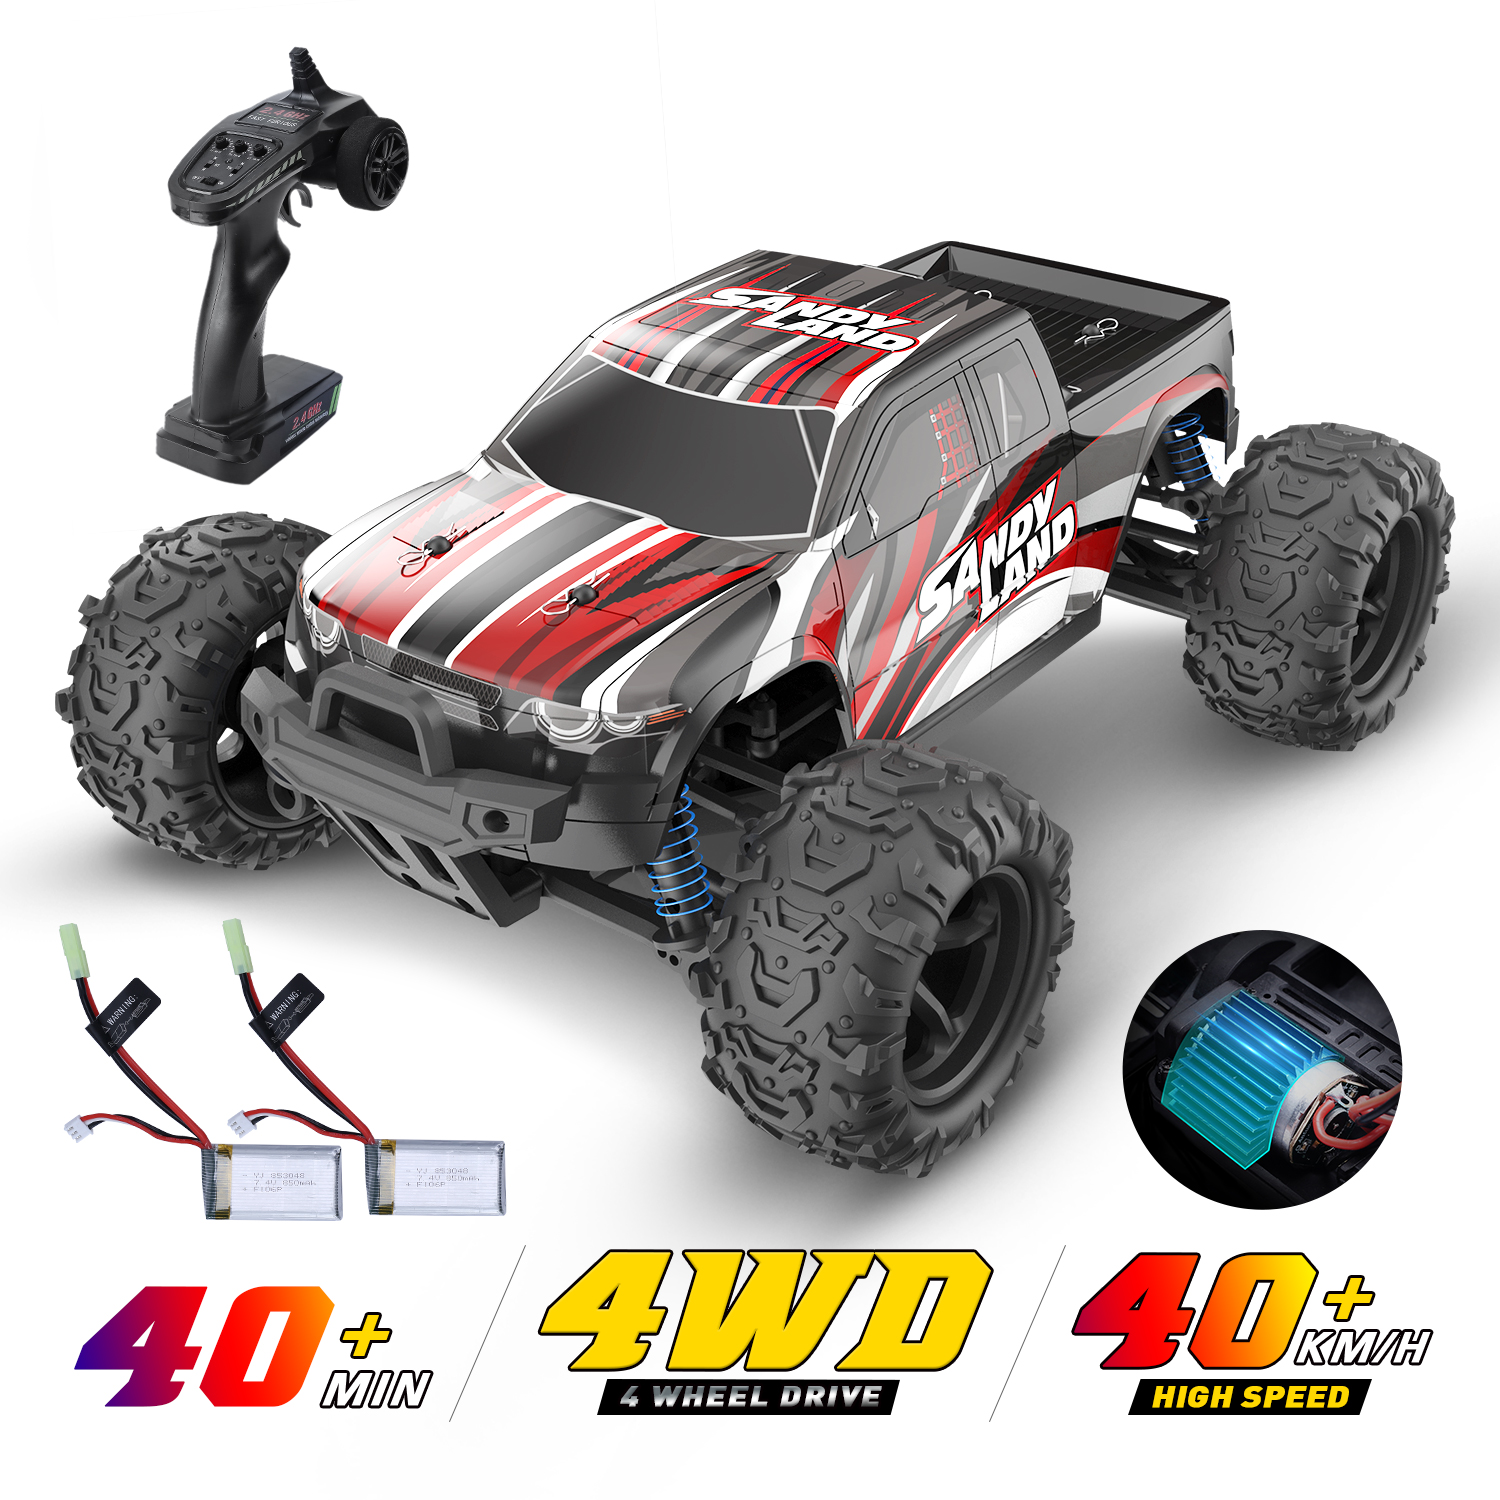 deerc-rc-cars-9300-high-speed-remote-control-car-for-kids-adults-1:18-